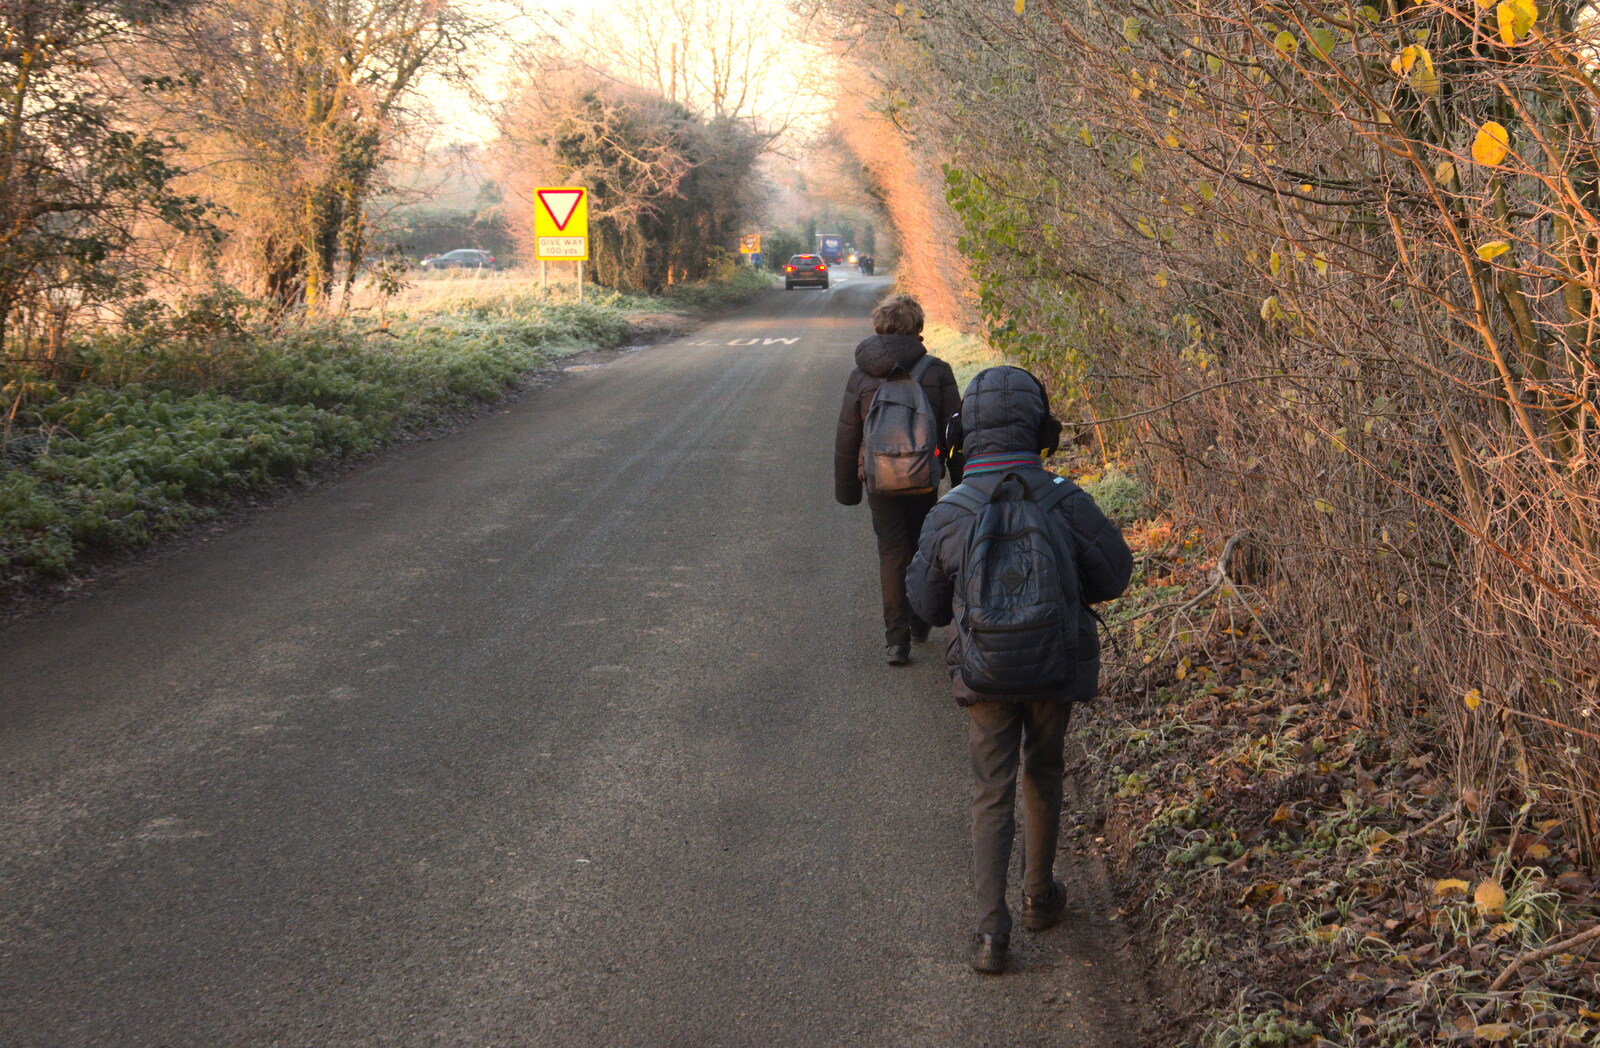 The boys head off to the bus stop from A Return to the Oaksmere, Brome, Suffolk - 8th December 2020